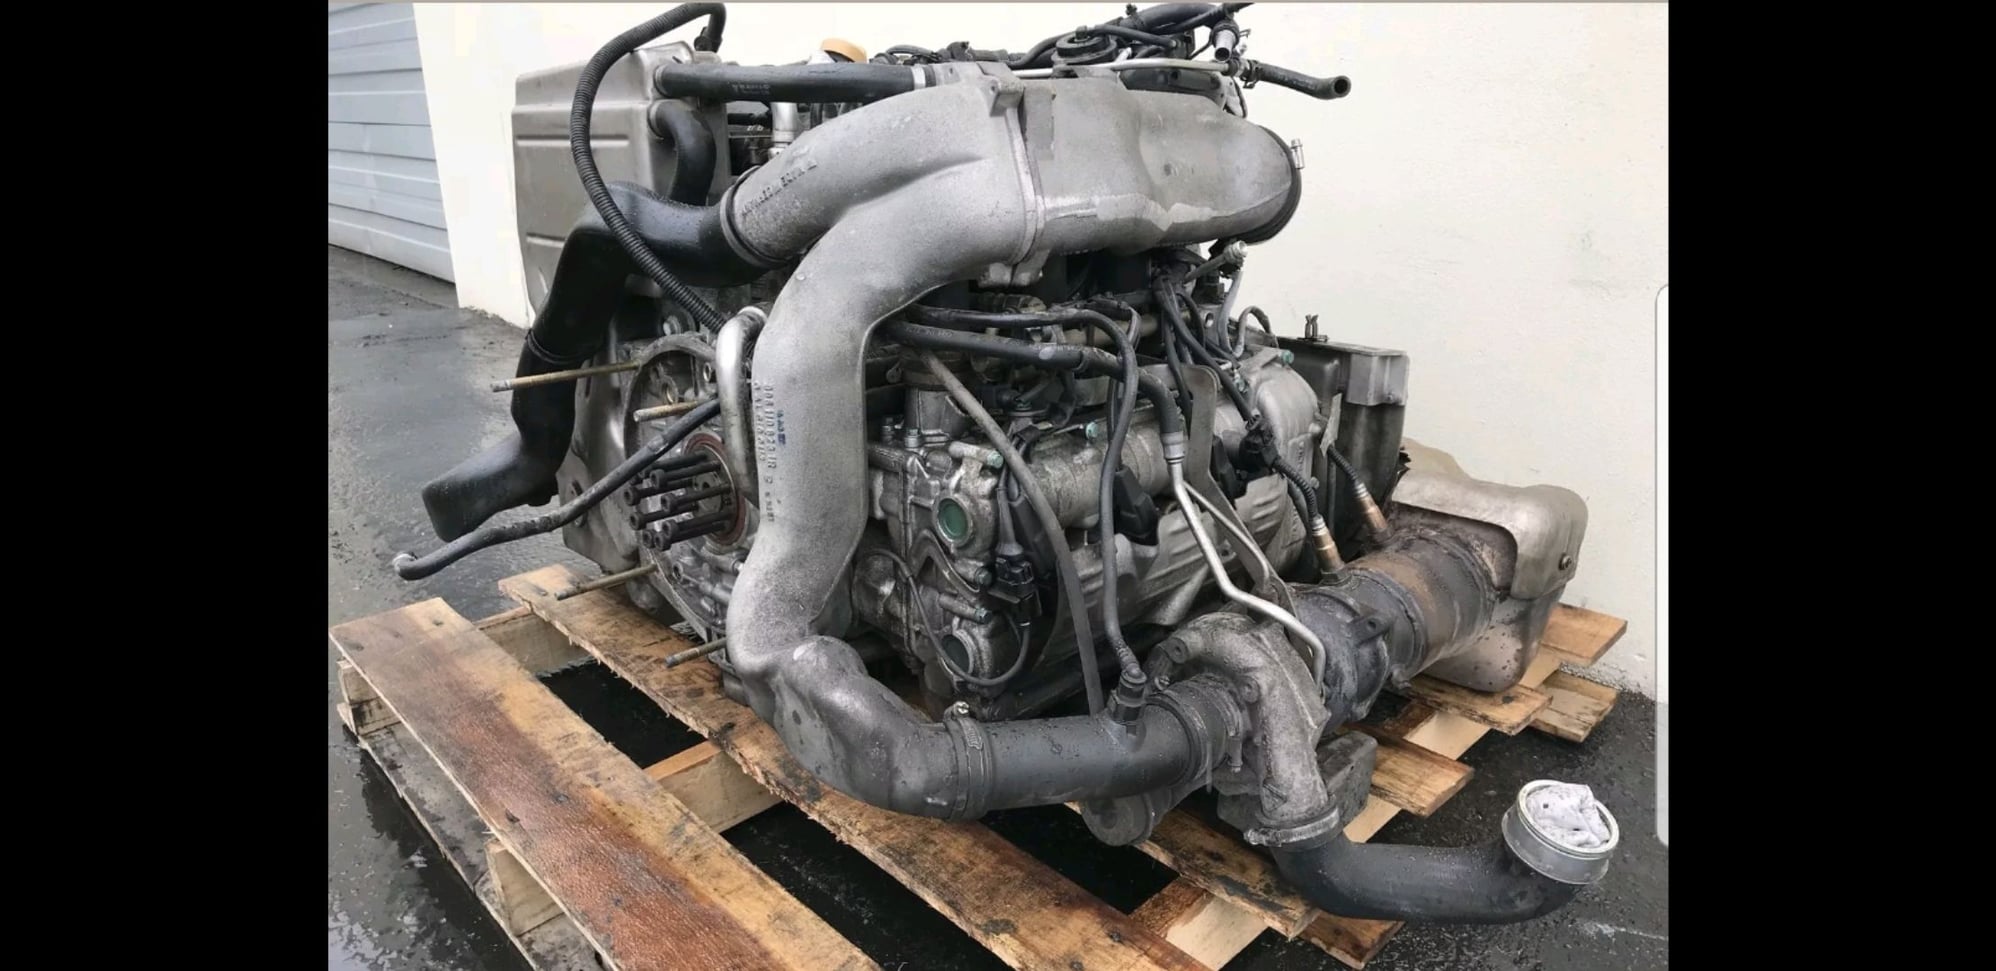 Engine reference pictures - Page 2 - 6SpeedOnline - Porsche Forum and